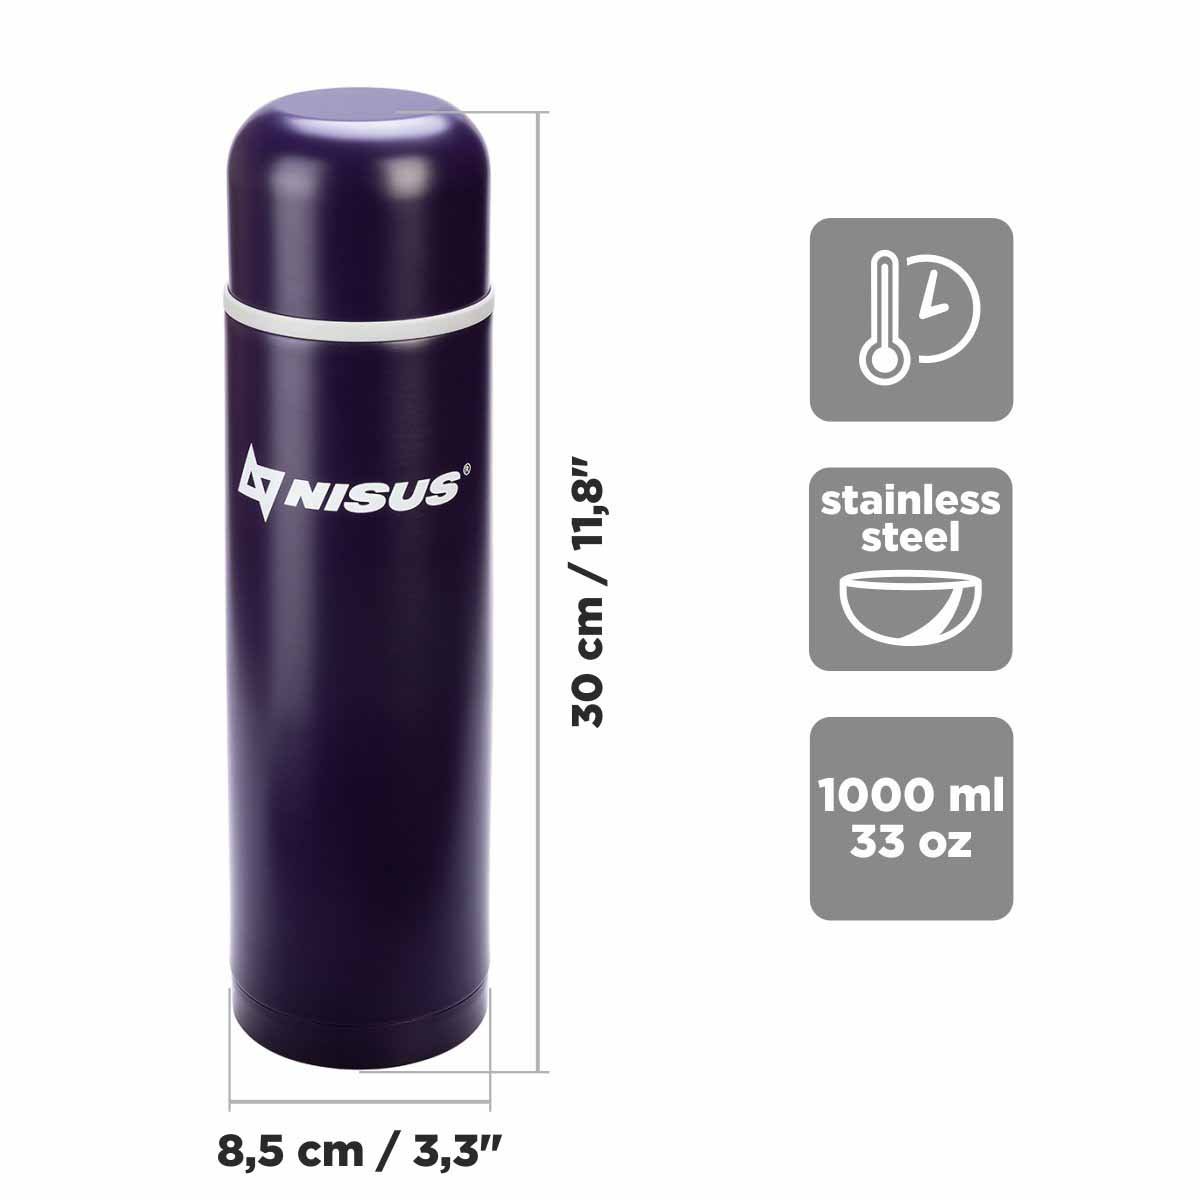 Compact Insulated Vacuum Flask with 2 Lid Cups, 33 oz, Limited Edition, purple is 11.8 inches high and 3.3 inches wide